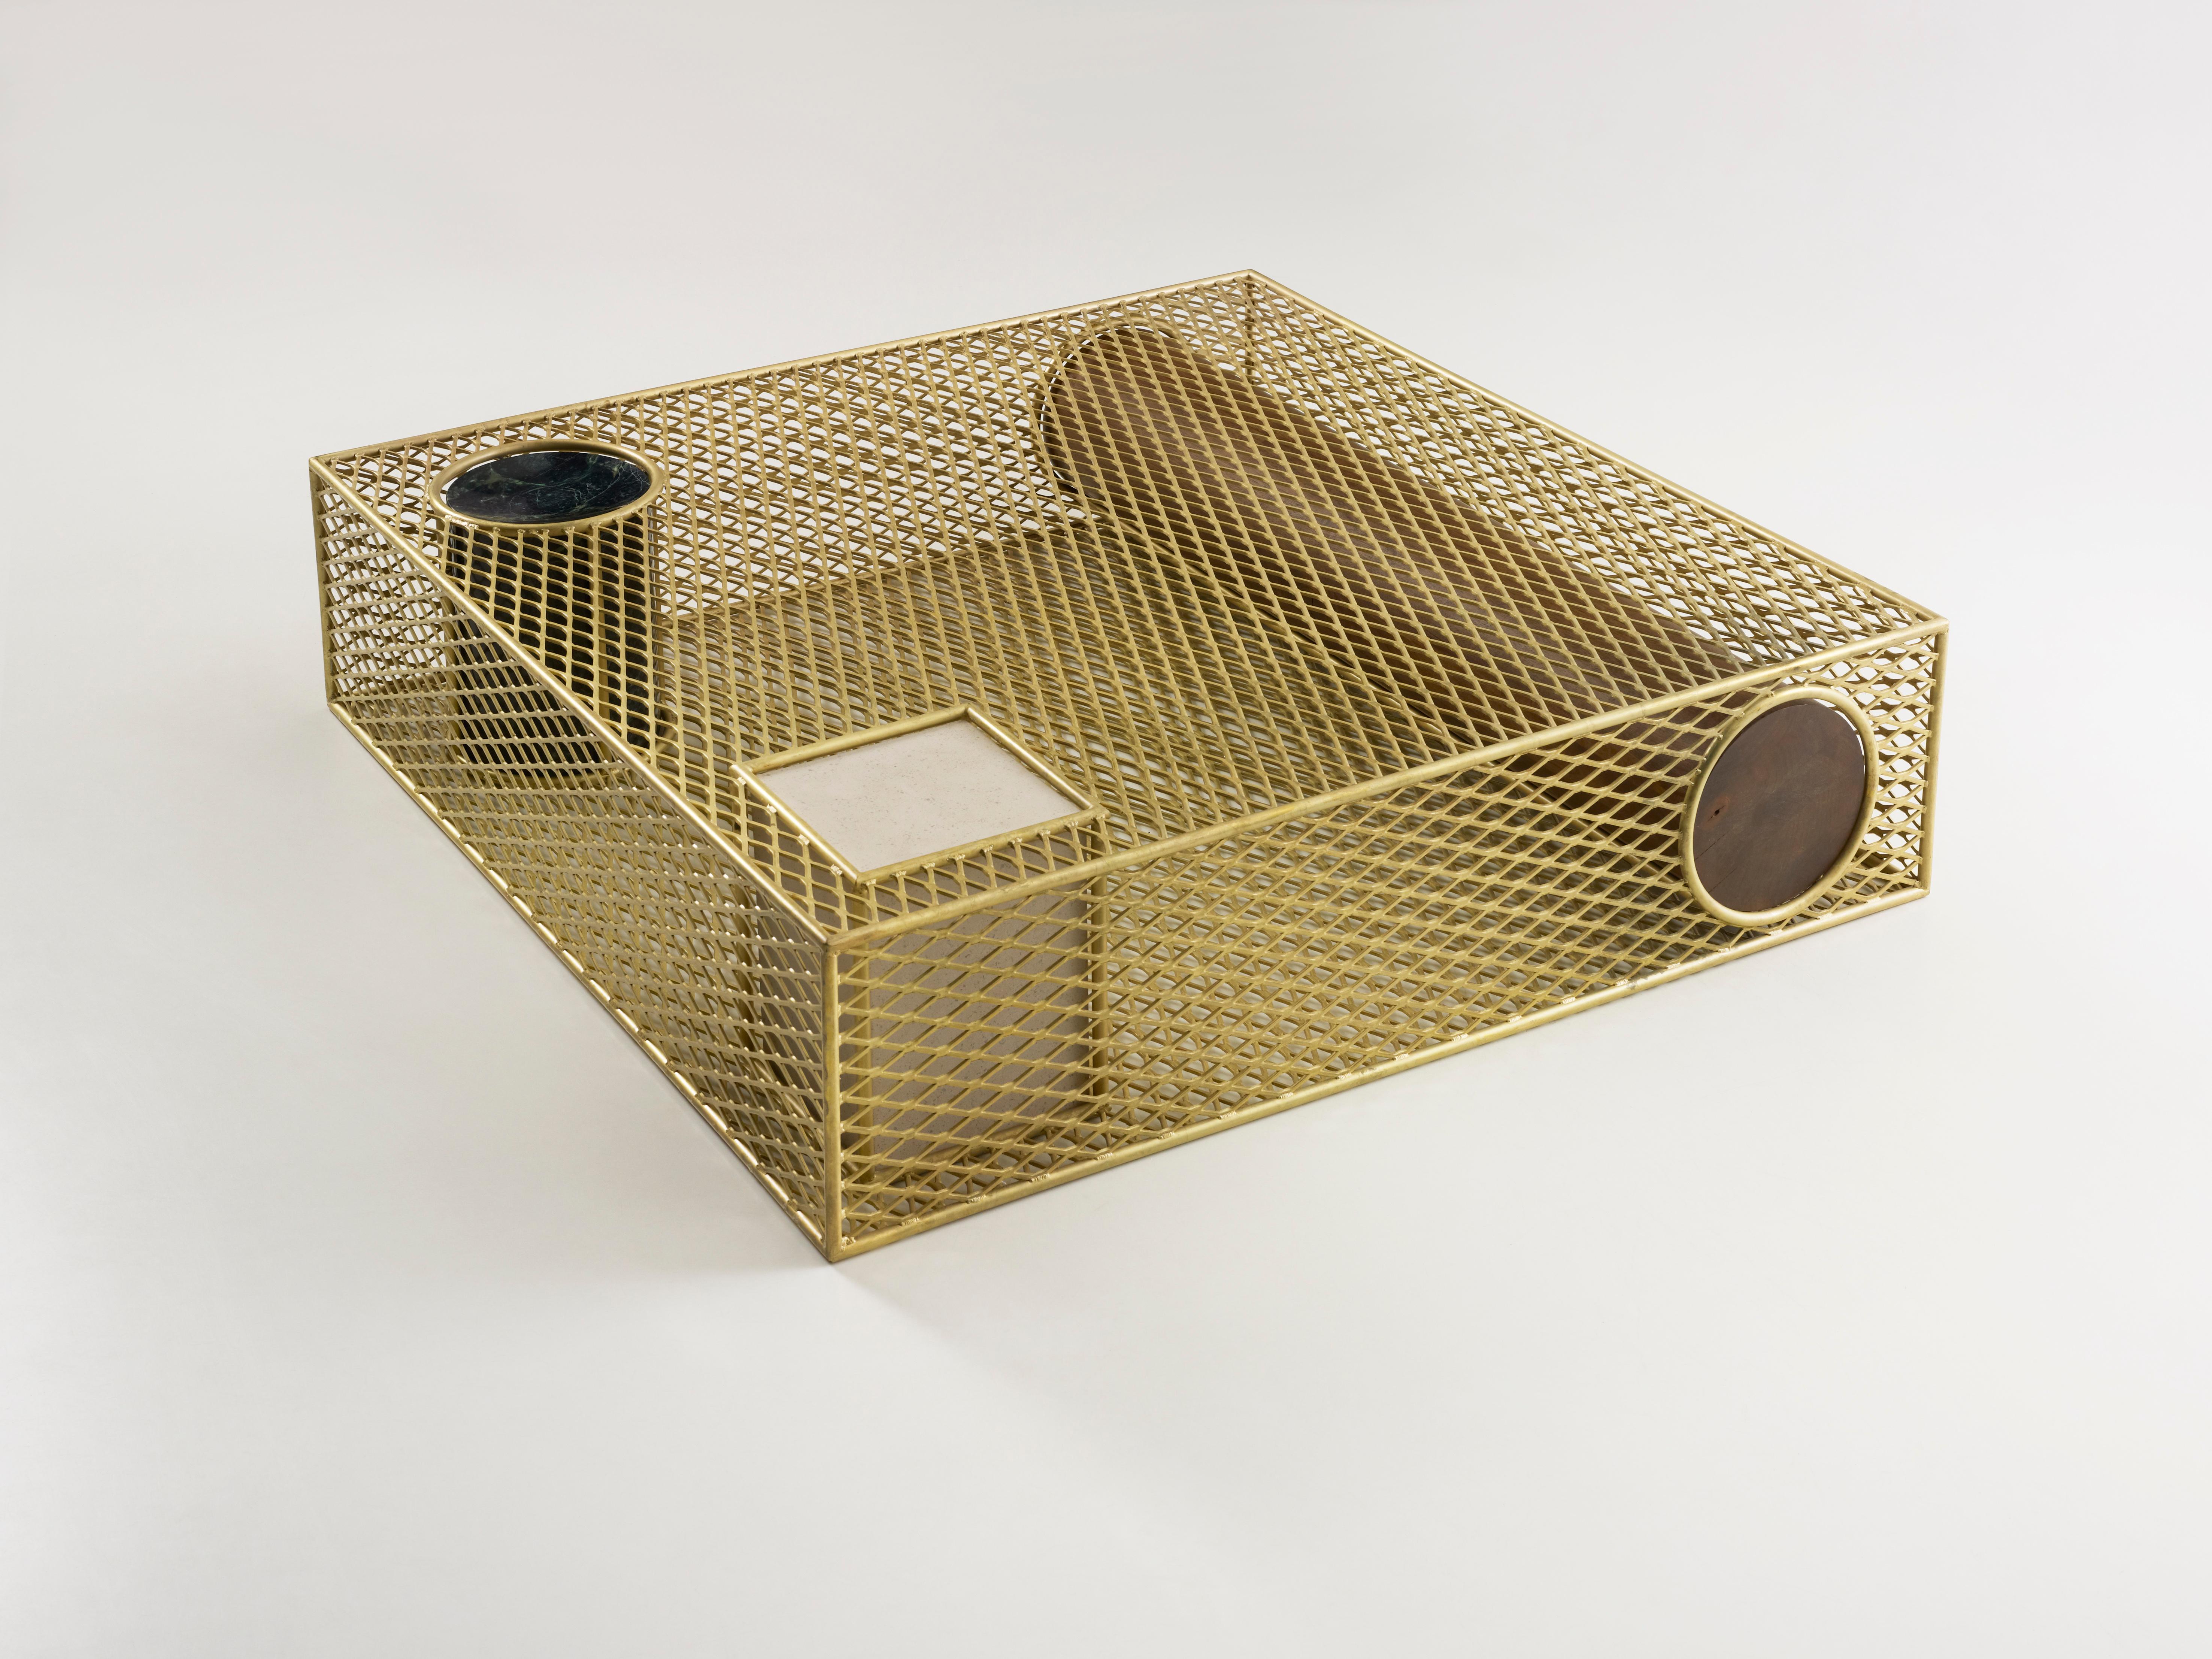 The ‘Caged Elements’ Table is a minimalistic coffee table by star of British design Faye Toogood, long-standing editor at World of Interiors, and renowned for her set productions for Comme des Garçons, Tom Dixon and Alexander McQueen. 'This table is